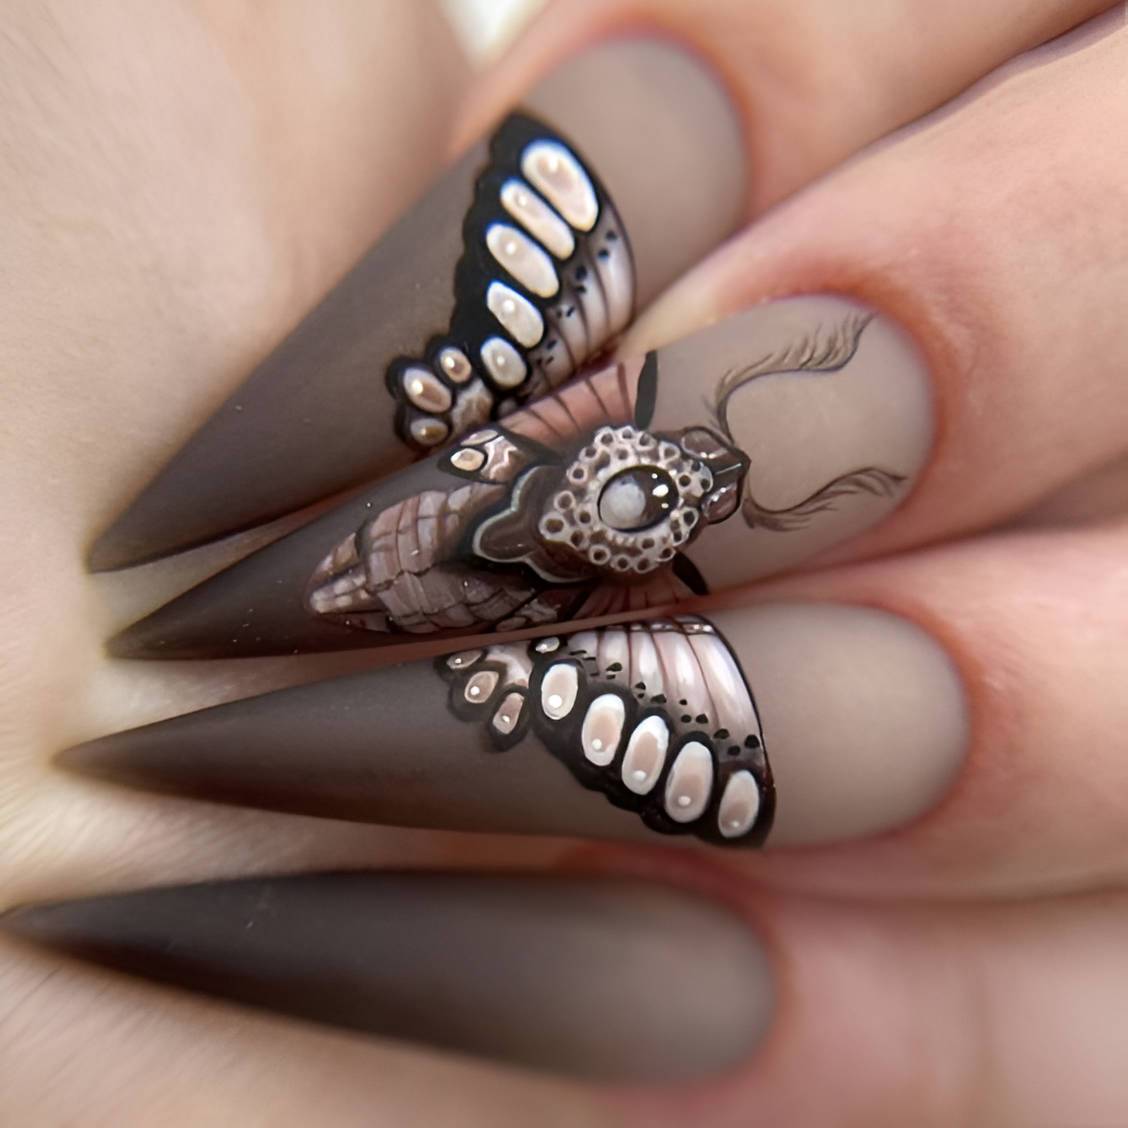 Stunning Stiletto Nail Designs Nobody Can Resist - 247